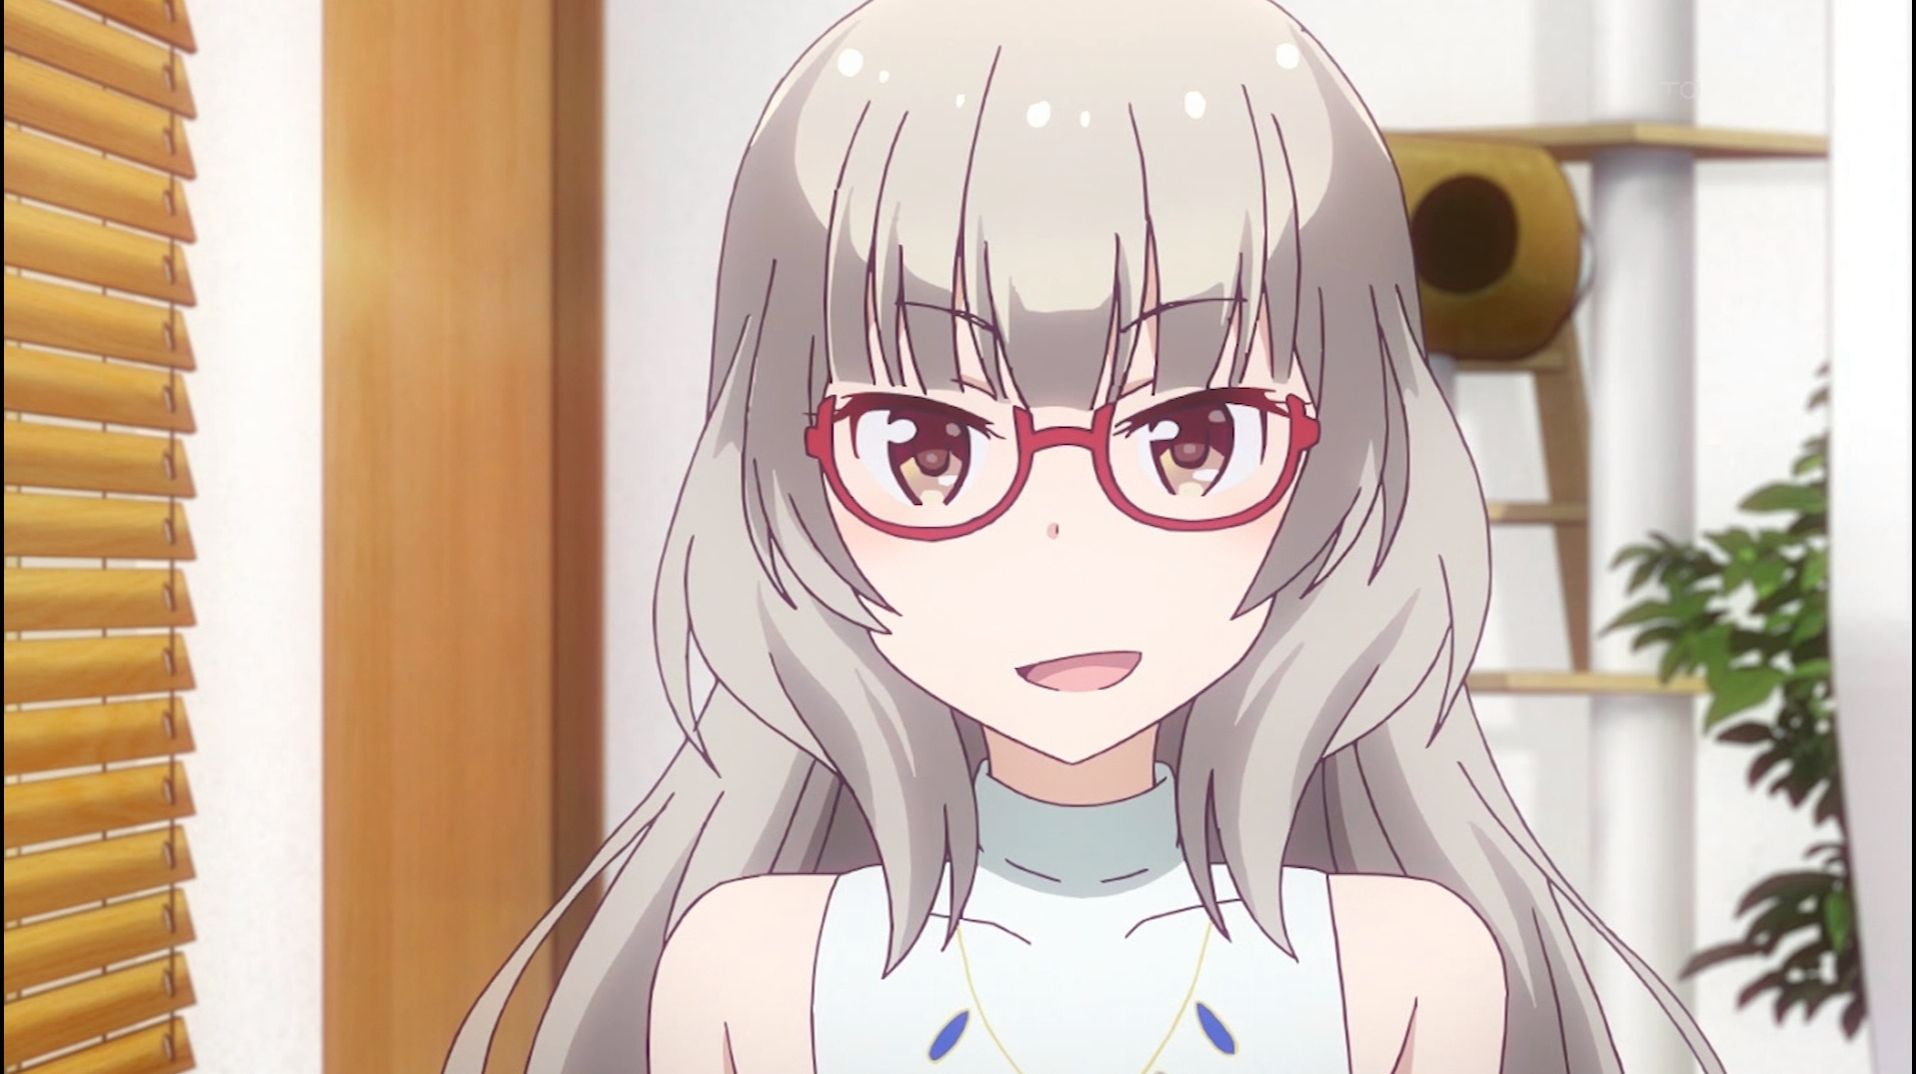 [Artificial mouth times] "NEW GAME! "Of all nine episodes, Yuri hifumi nude too たまらな of wwwwwwwww 2